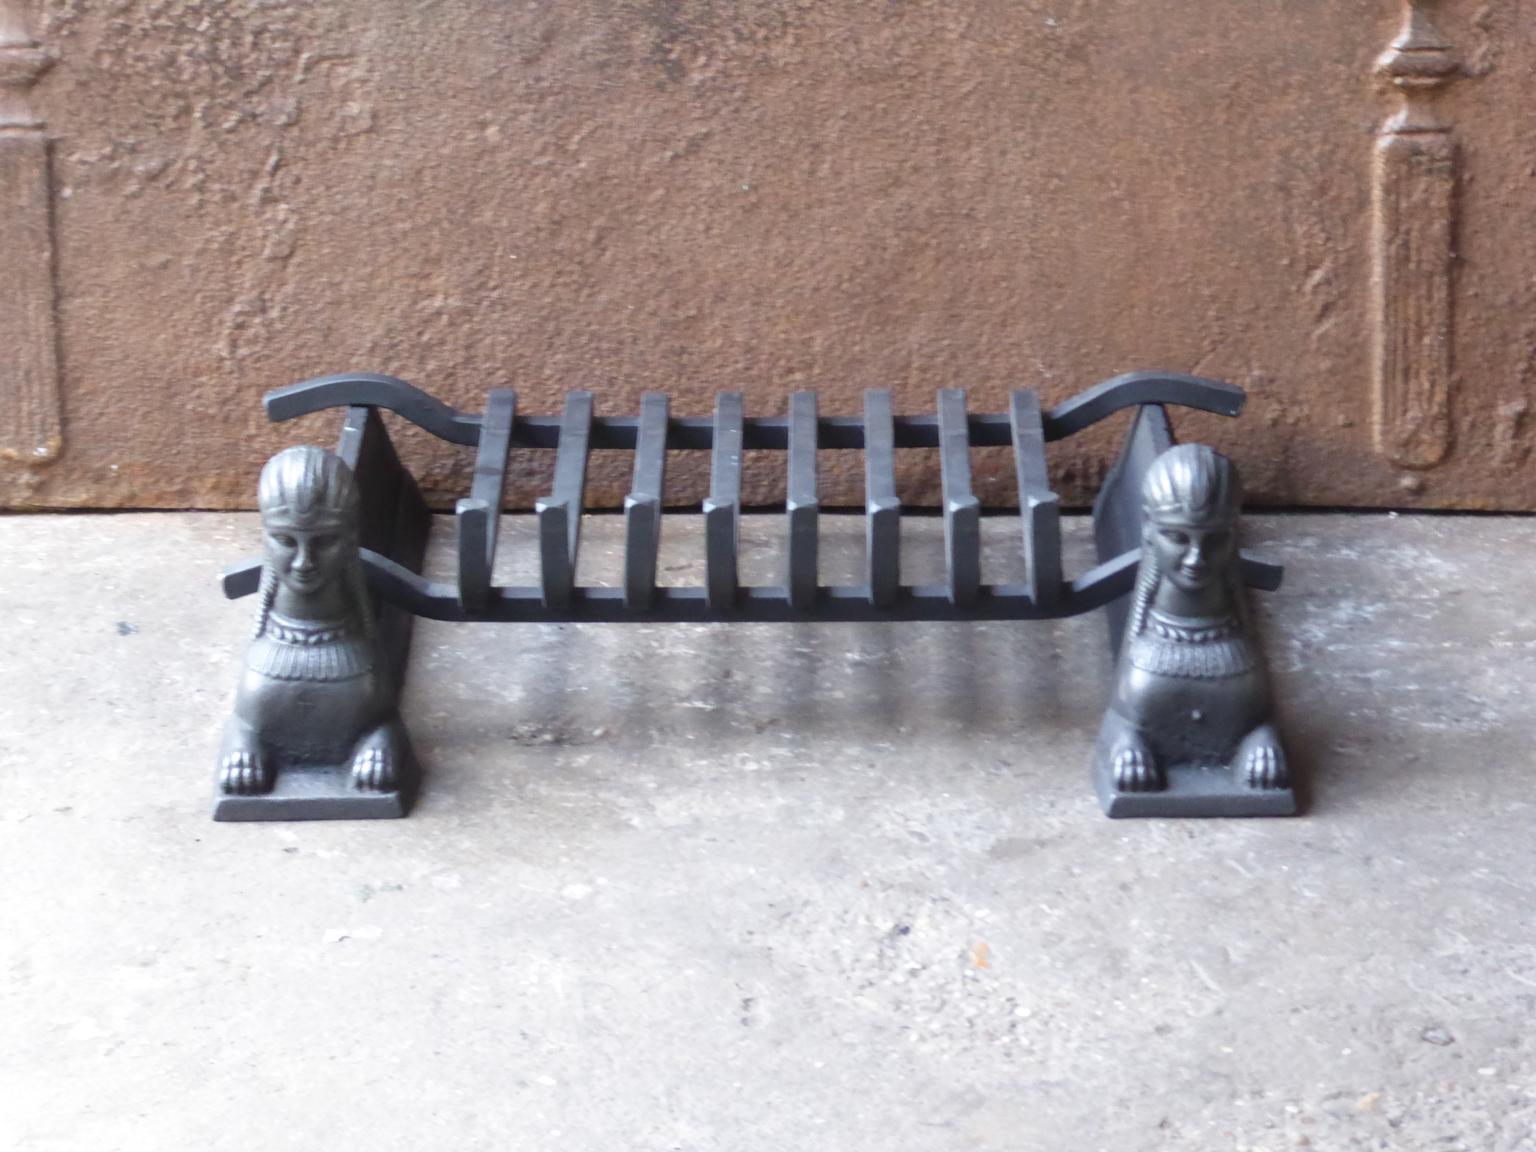 Cast 18th-19th Century French Empire Fire Grate, Fireplace Grate